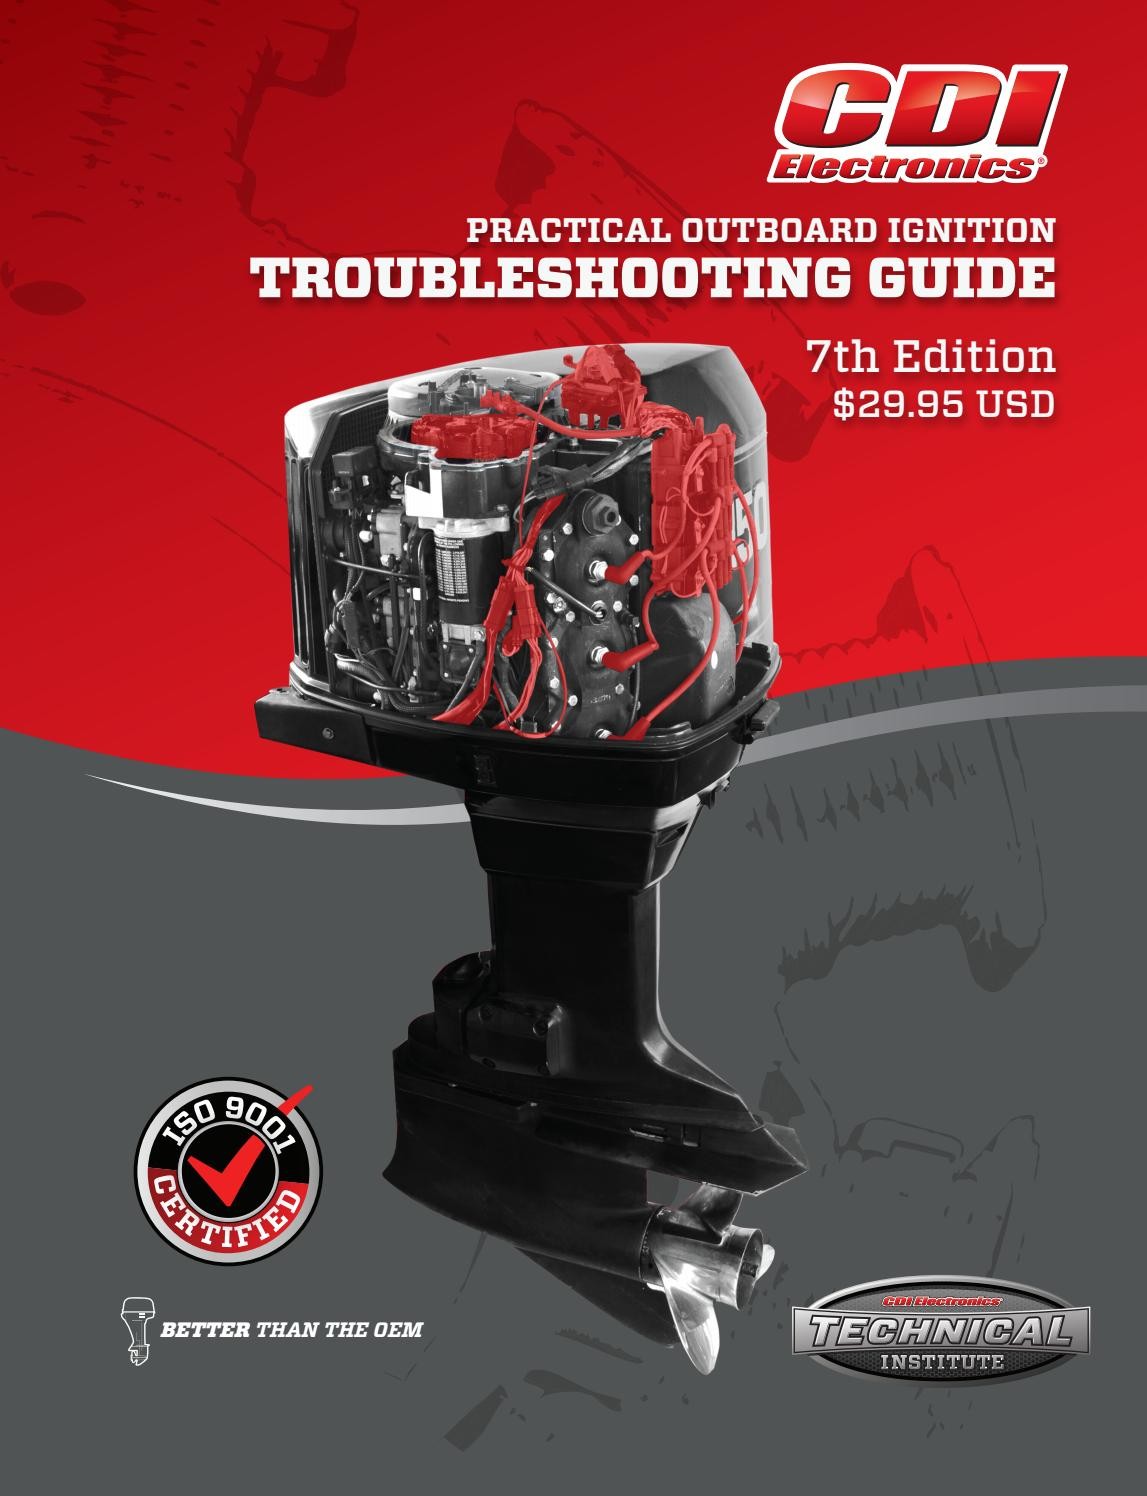 CDI Electronics Practical Outboard Ignition Troubleshooting Guide 7th Edition by CDI Electronics issuu